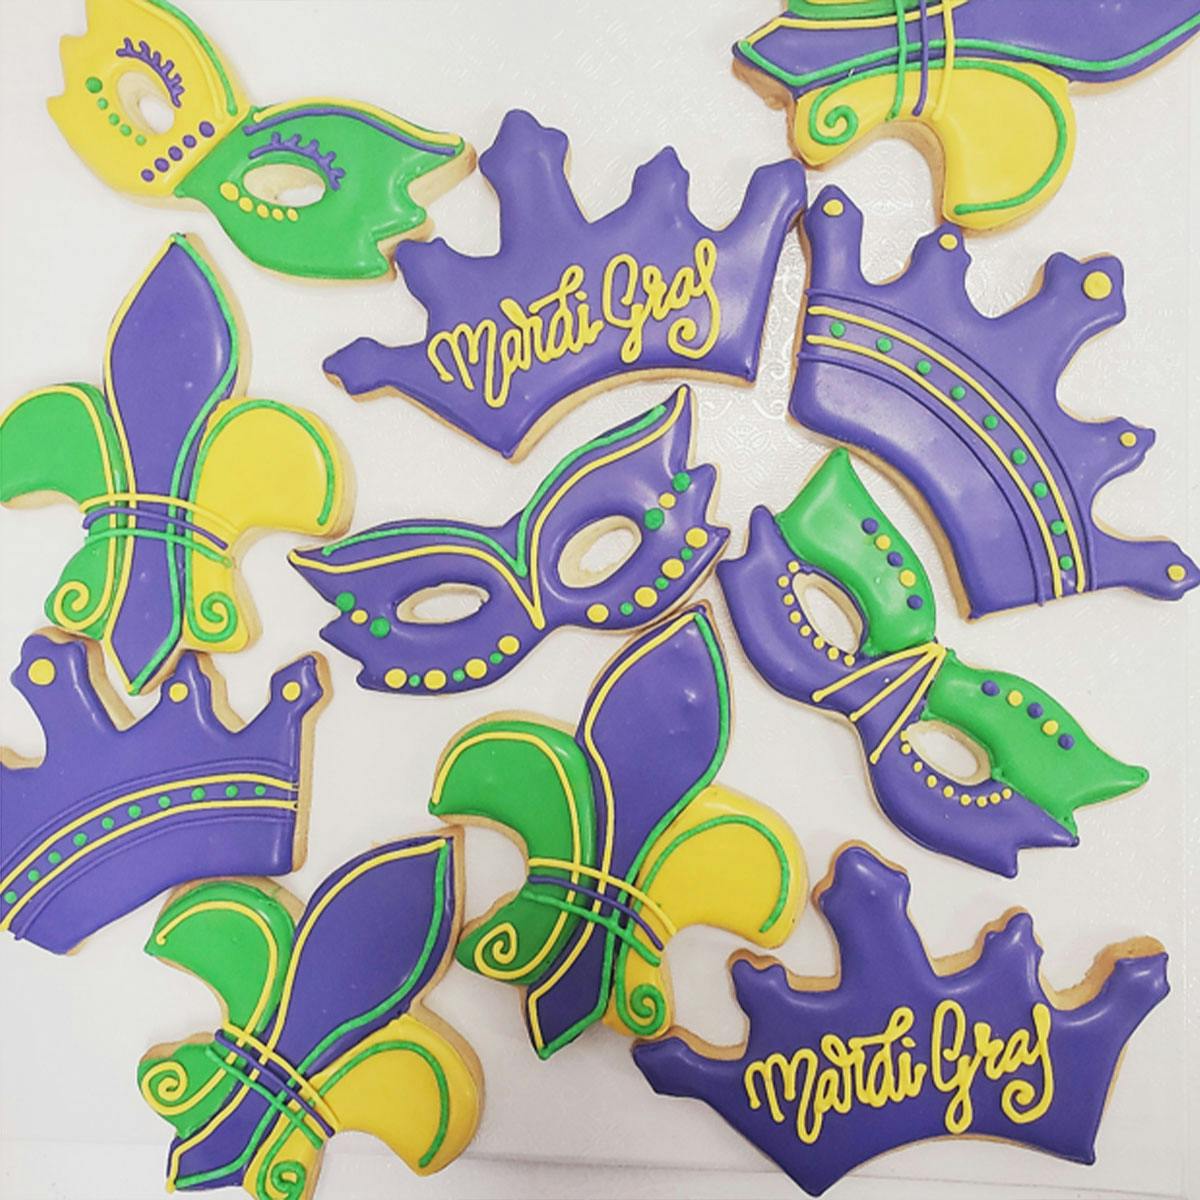 Iced Mardi Gras Cookie Gift Set - 12 Pack by Elegant Desserts | Goldbelly